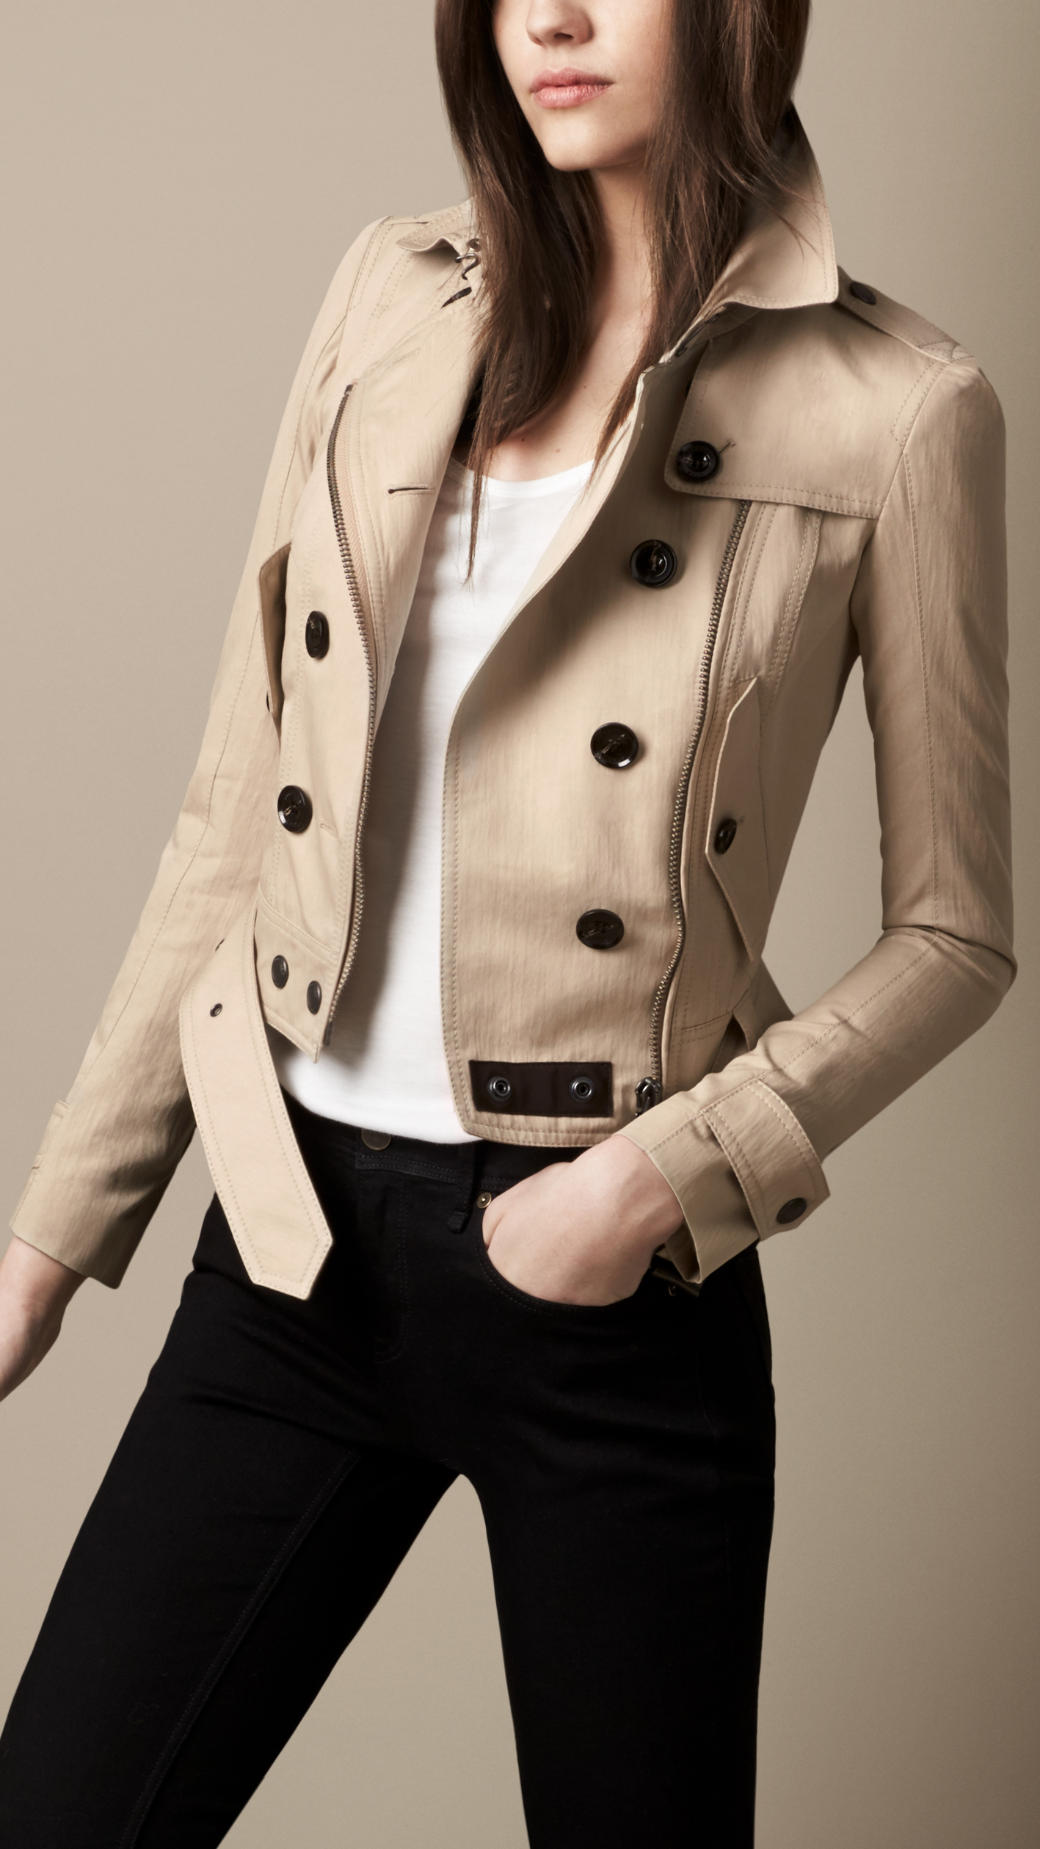 Burberry Cropped Trench Coat on Sale, 55% OFF | empow-her.com